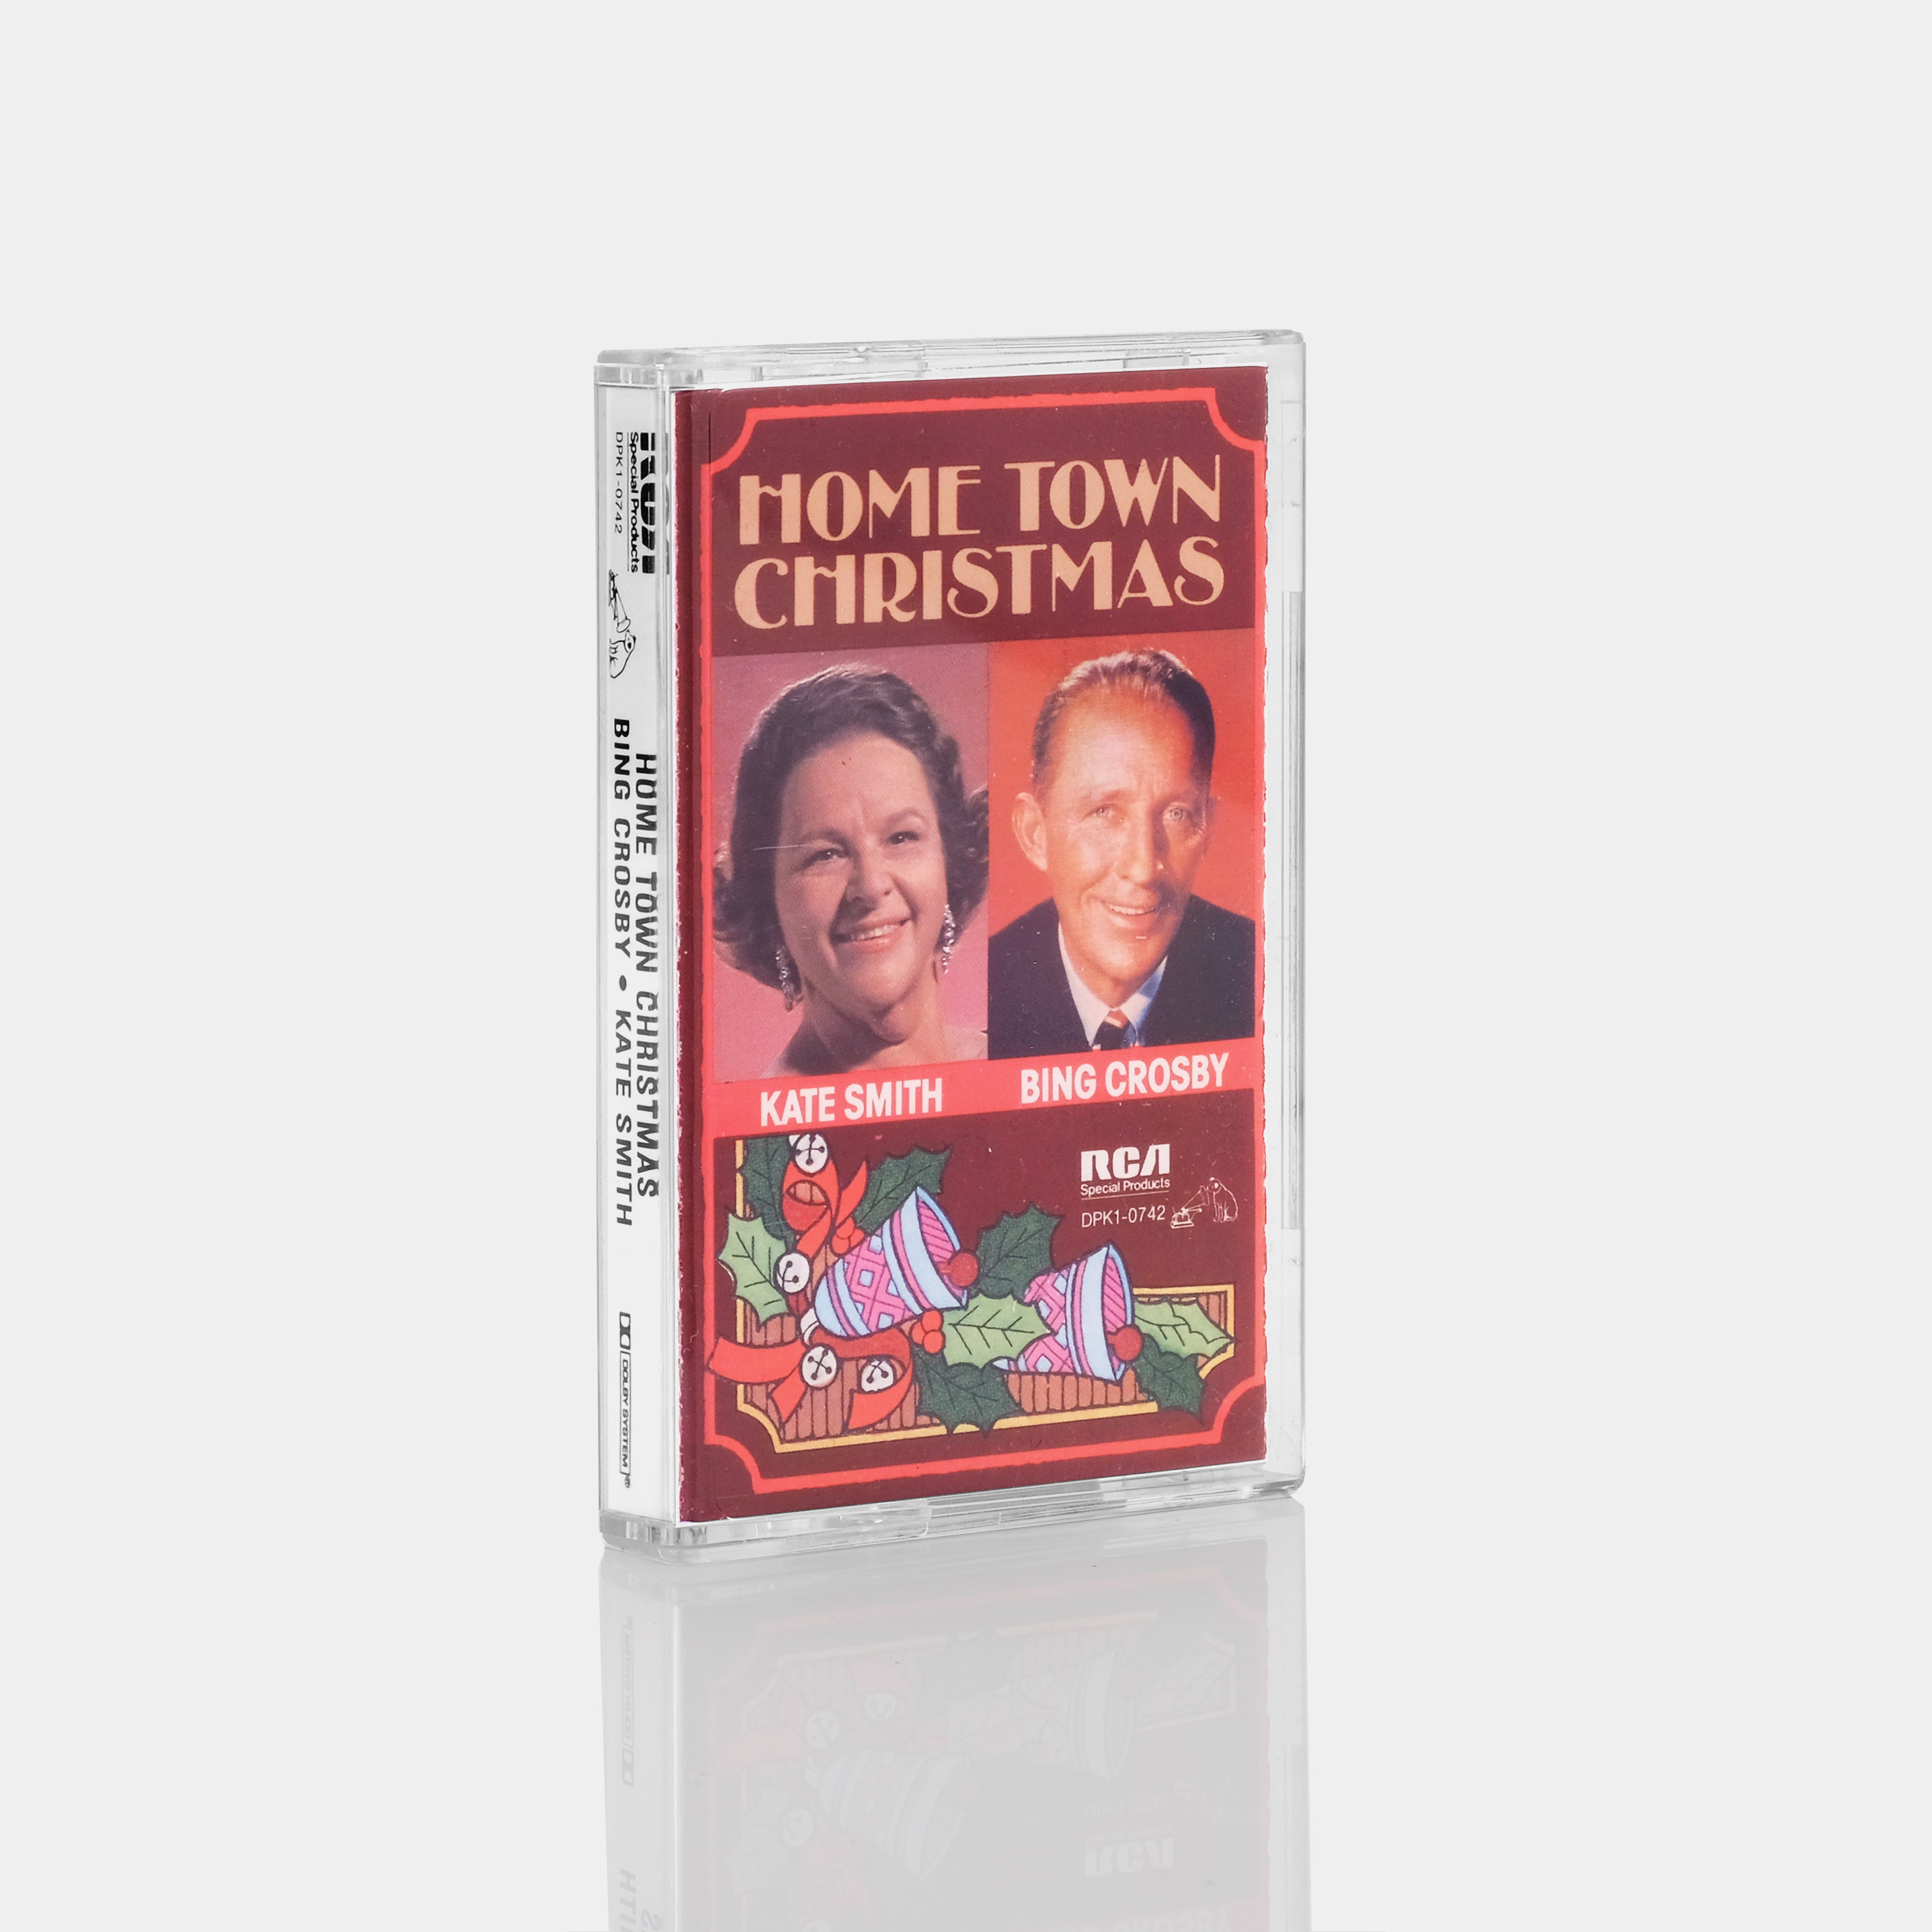 Bing Crosby & Kate Smith - Home Town Christmas Cassette Tape